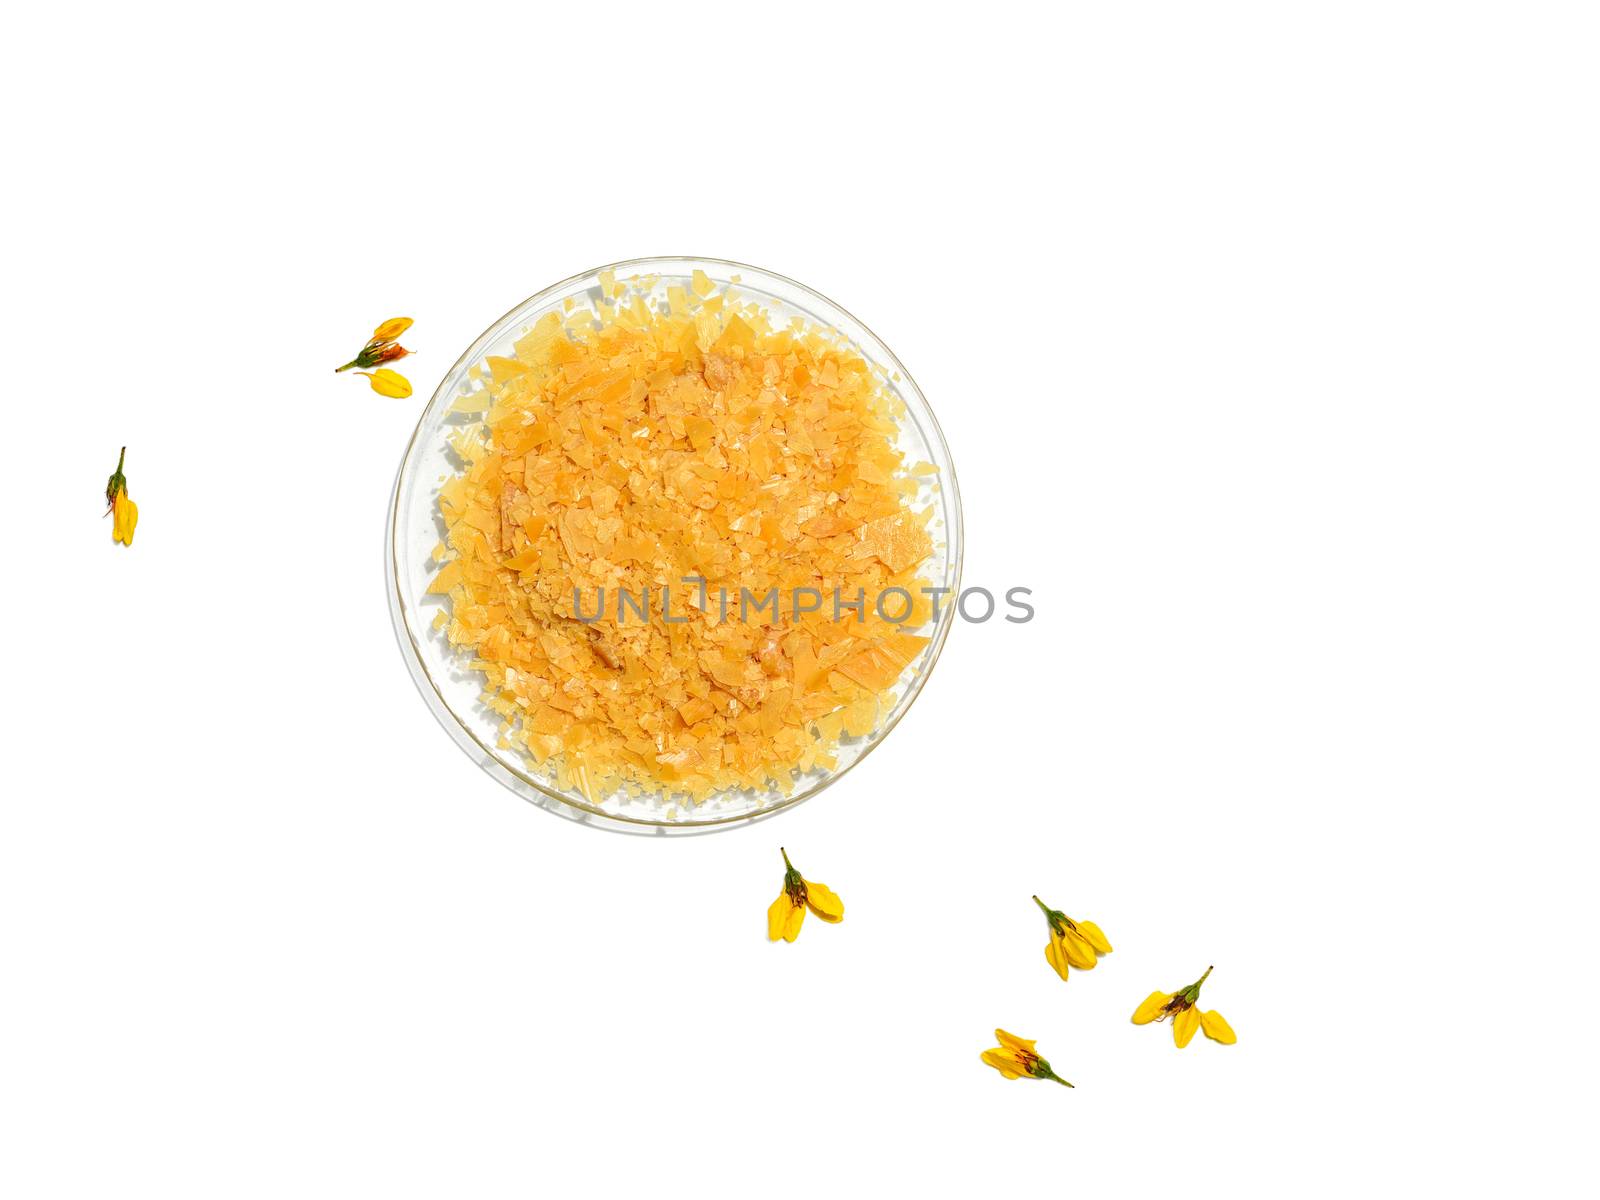 Organic Carnauba Wax comes in the form of hard yellow flakes and is widely used in cosmetics as an emulsifier or as a thickening agent for lipstick, eyeliner, mascara, eye shadow,foundation, deodorant